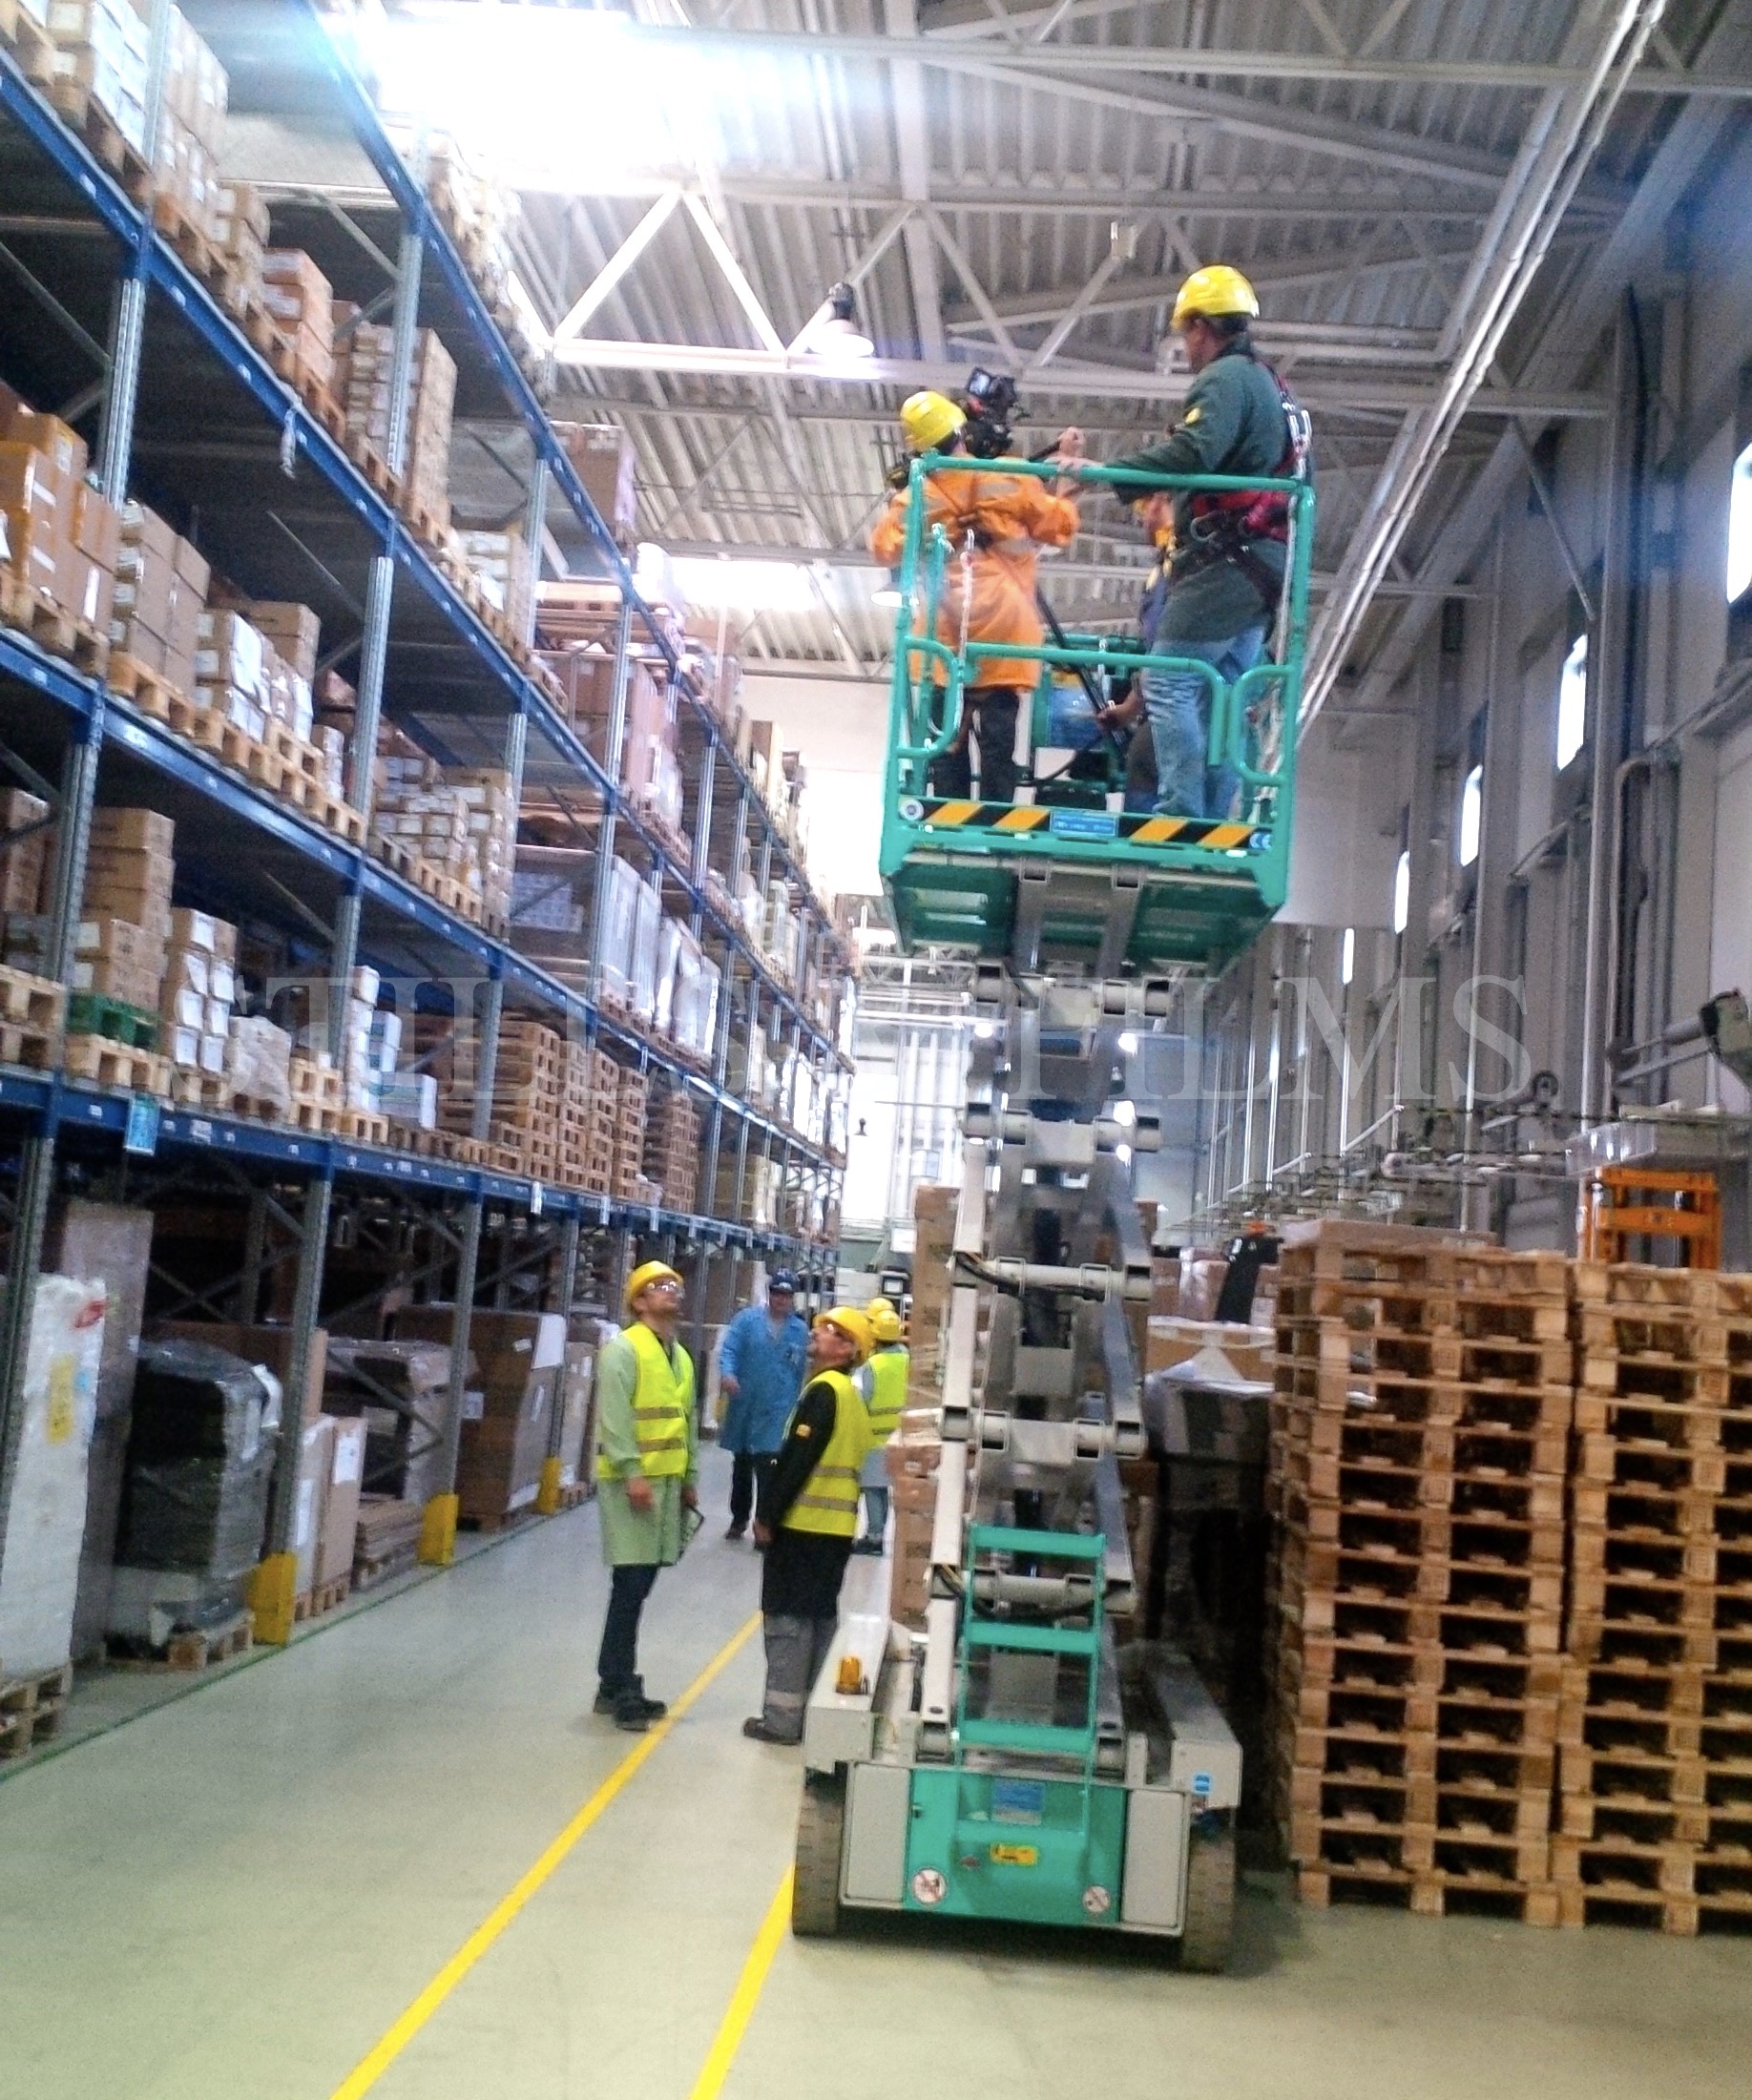 We are on a factory tour video shoot in Hungary.